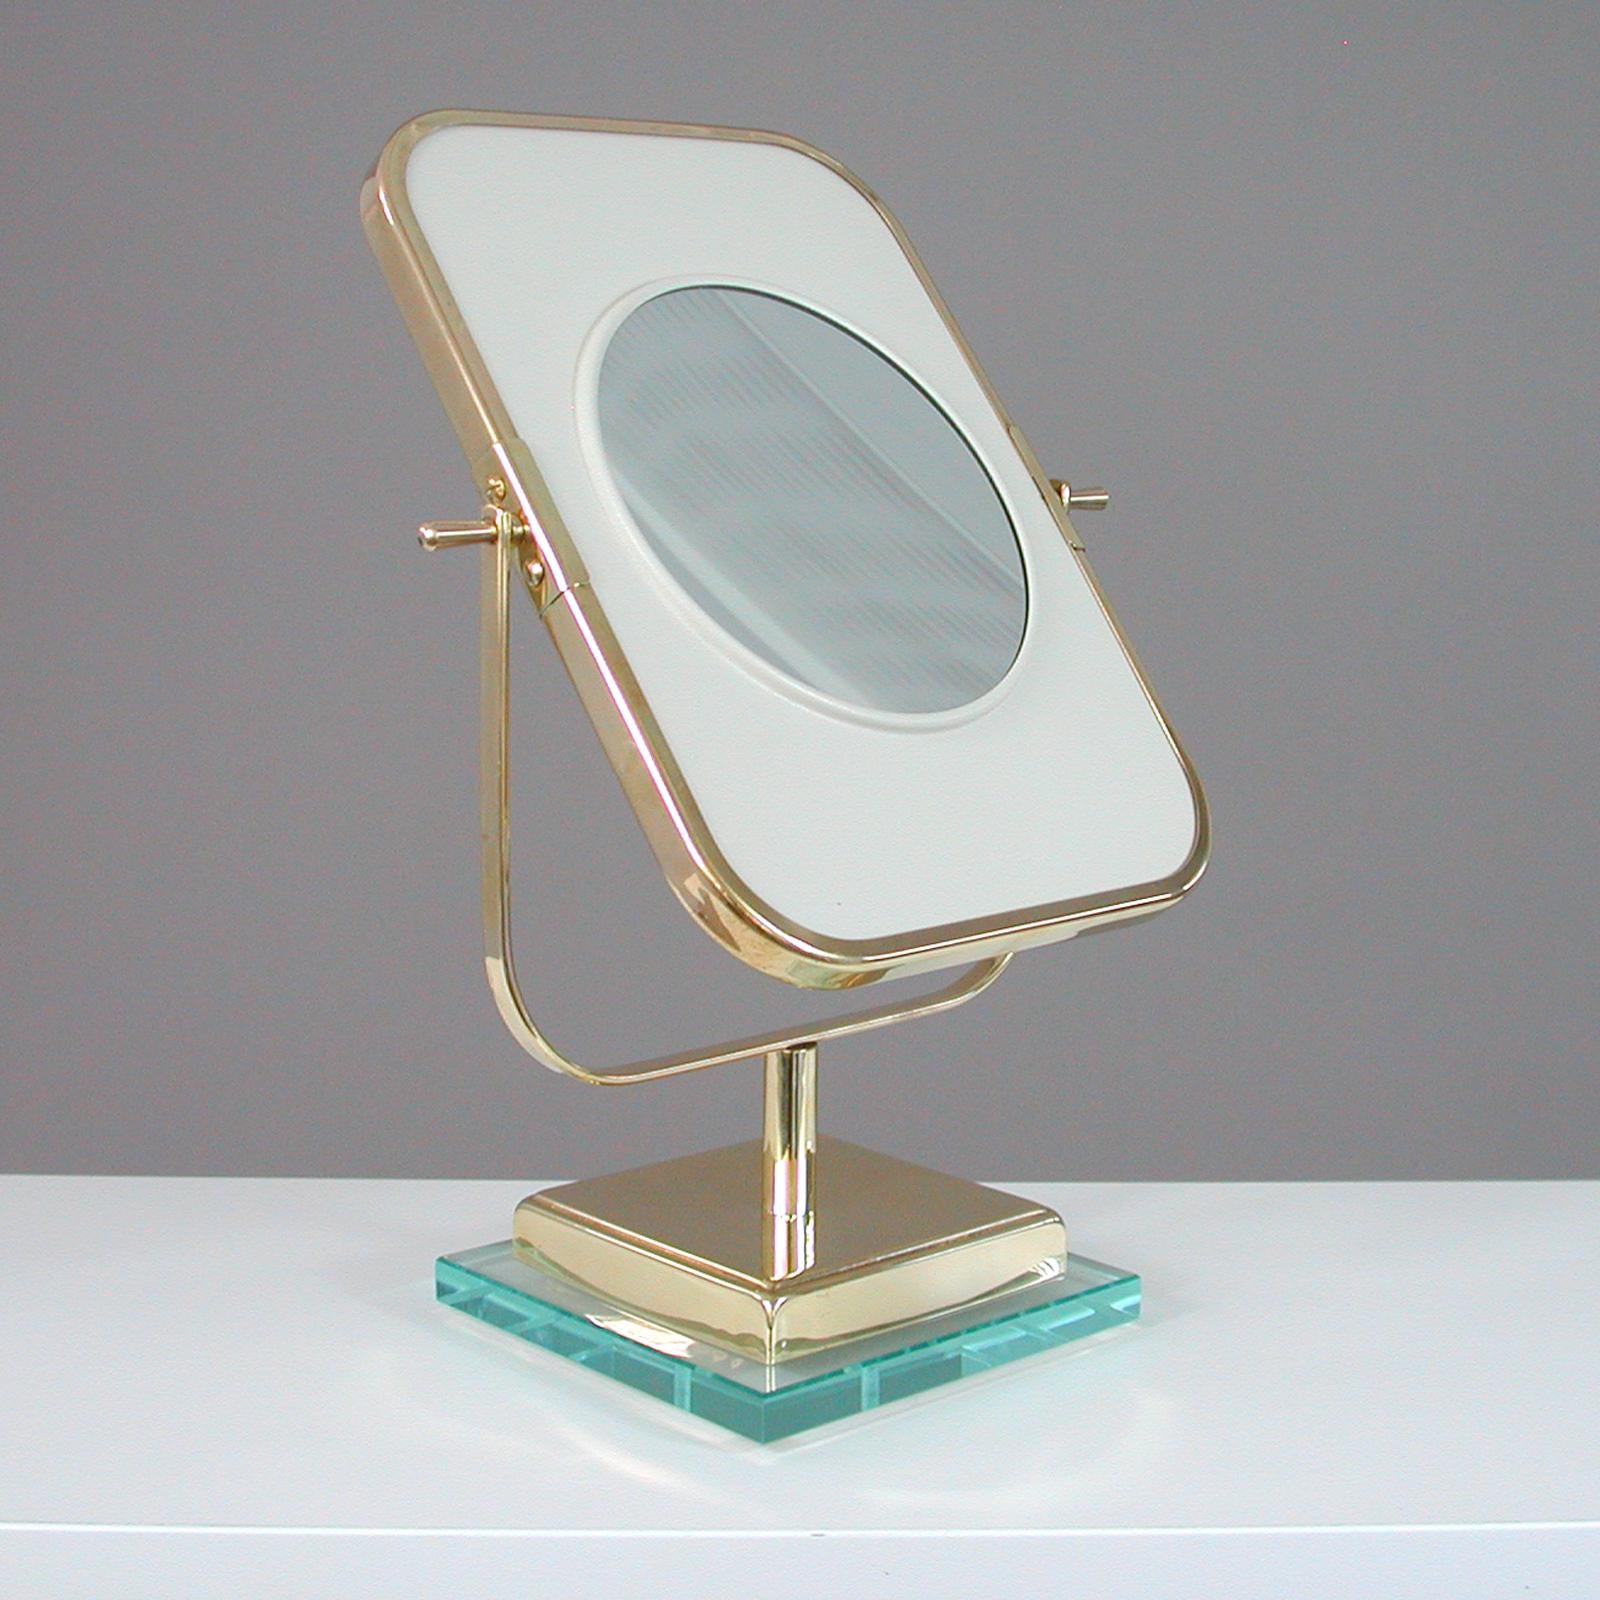 Italian Brass and Glass Double Sided Table Mirror 1950s, Fontana Arte Style 5